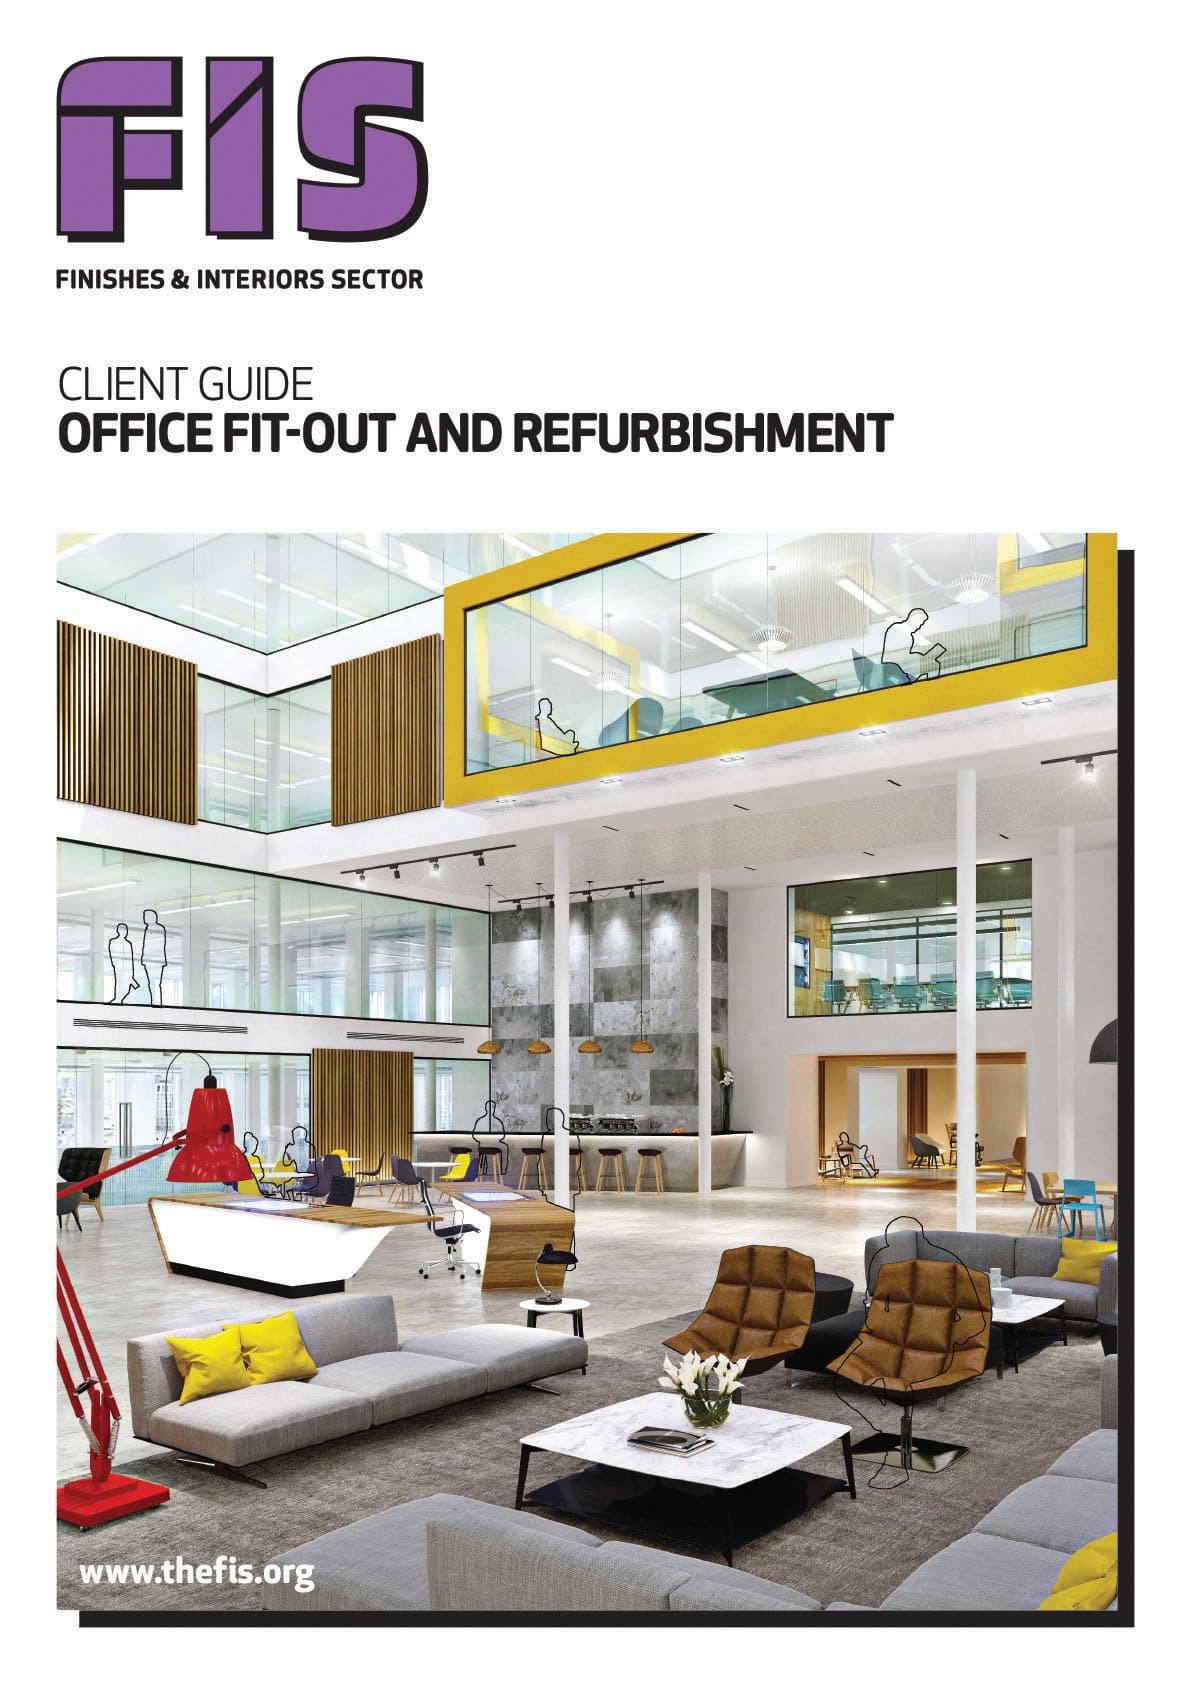 FIS launches Client Guide to Office Fit-Out and Refurbishment